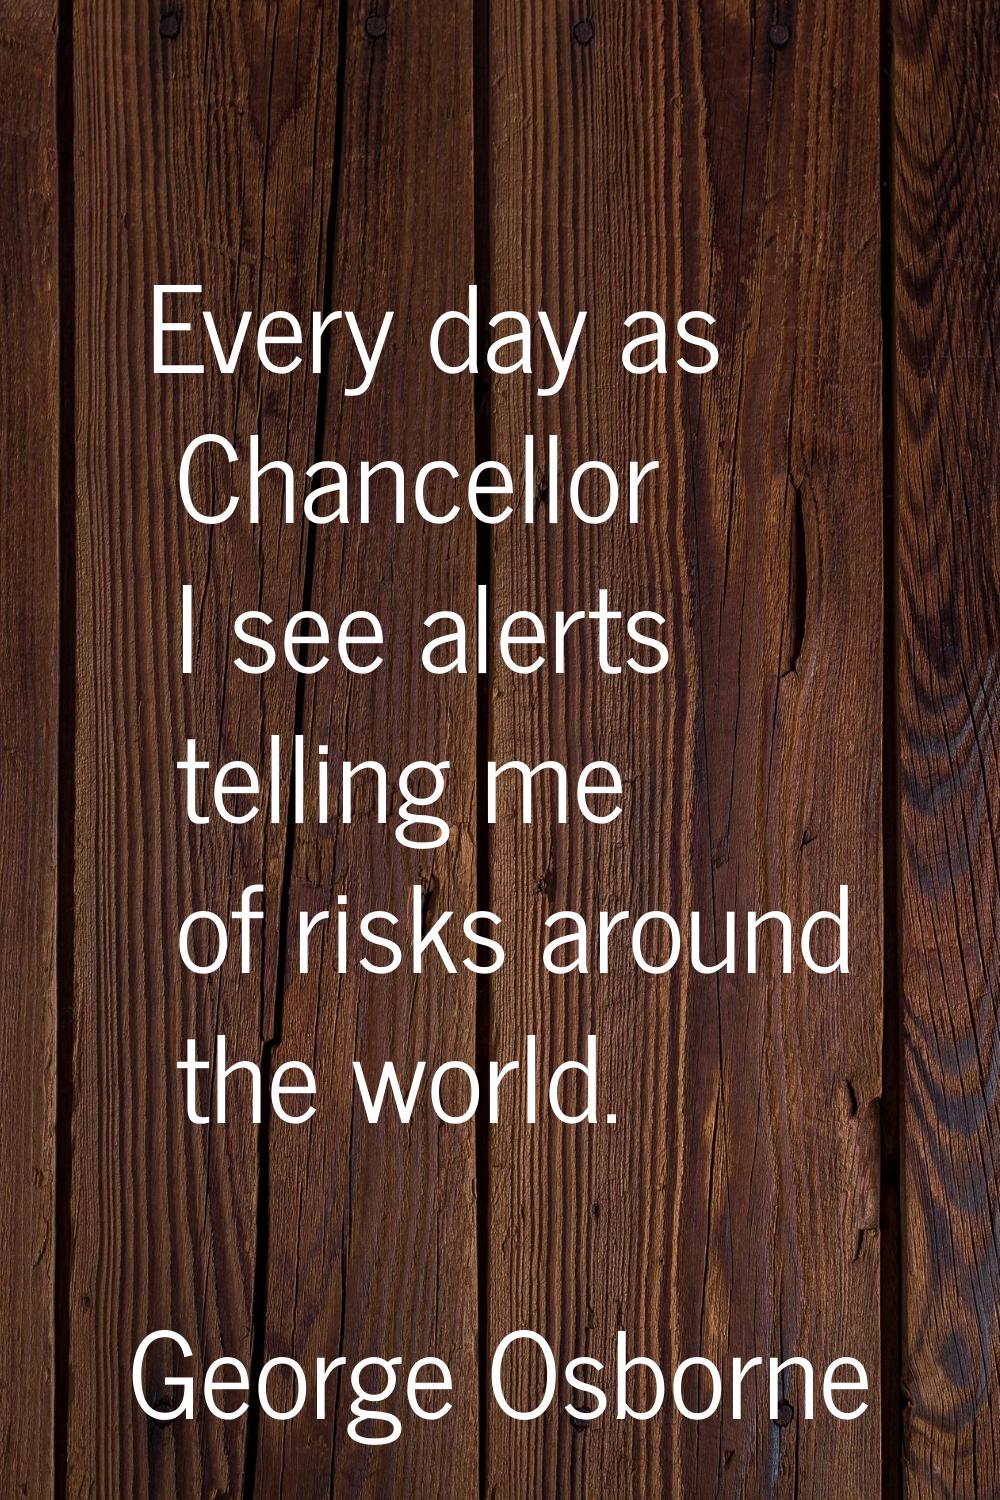 Every day as Chancellor I see alerts telling me of risks around the world.